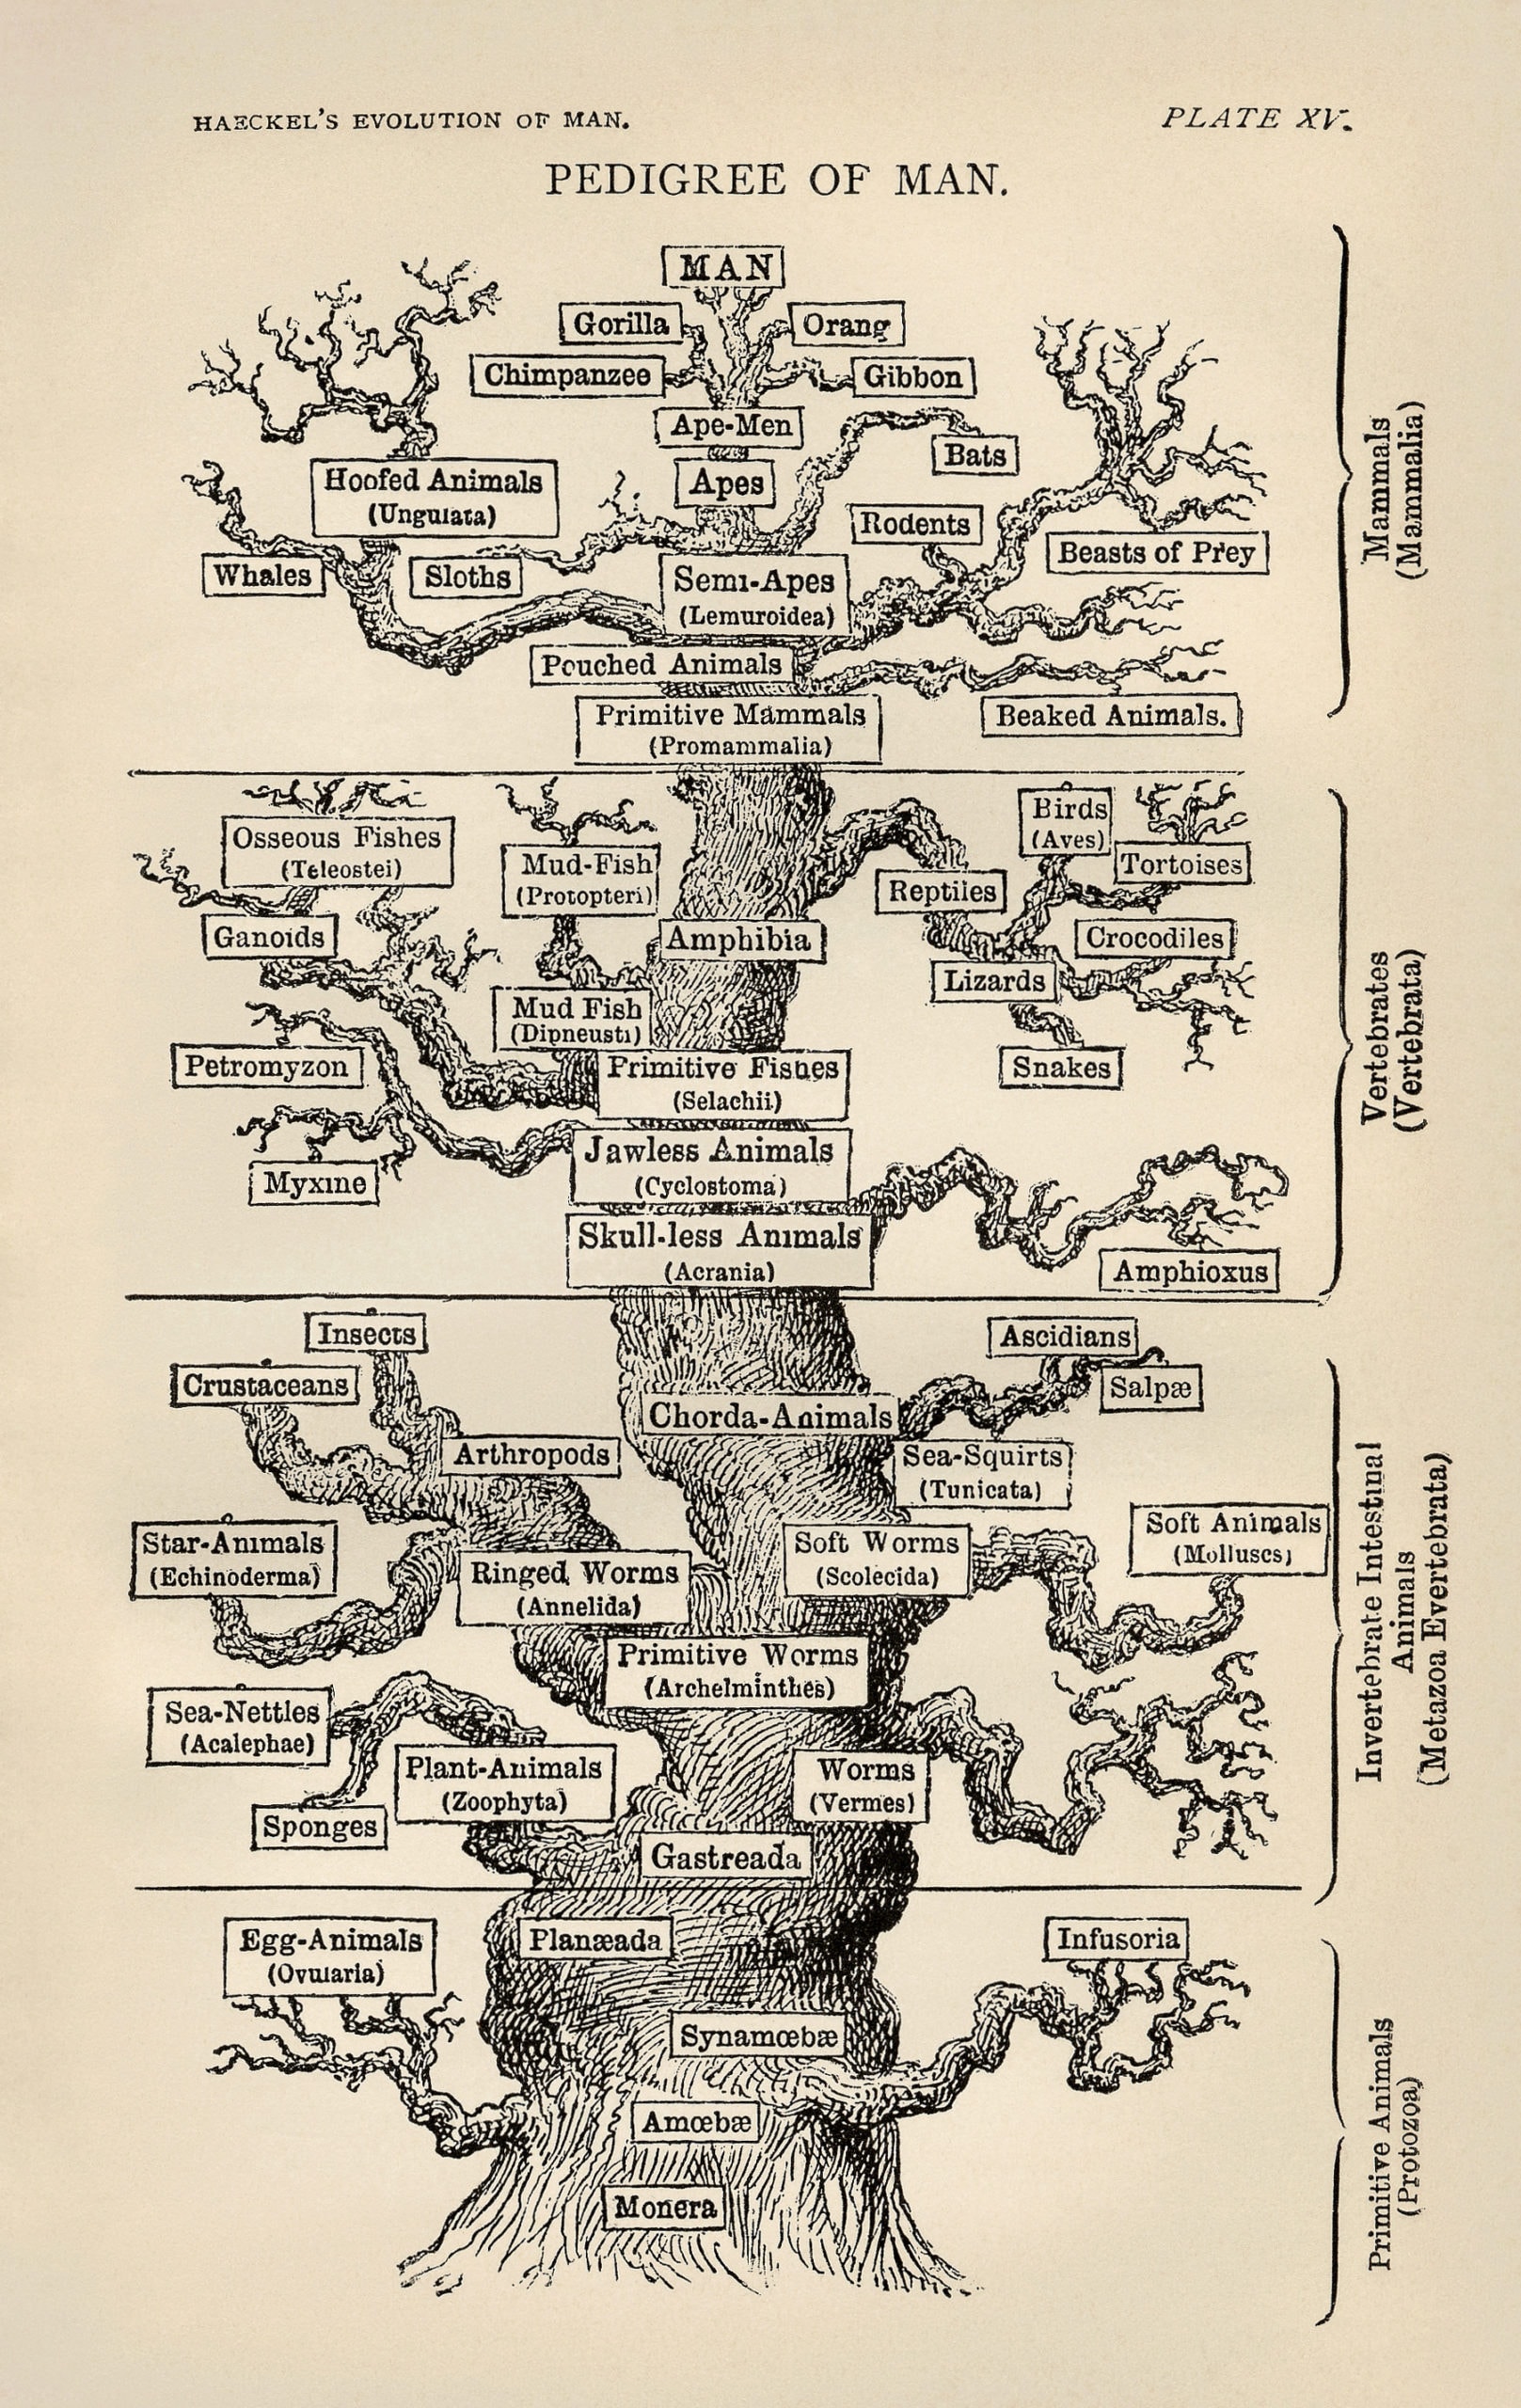 Ernst Haeckel's "Tree of Life" from The Evolution of Man (1879) depicts humanity arising from simpler forms of life, rather than directly created by God.